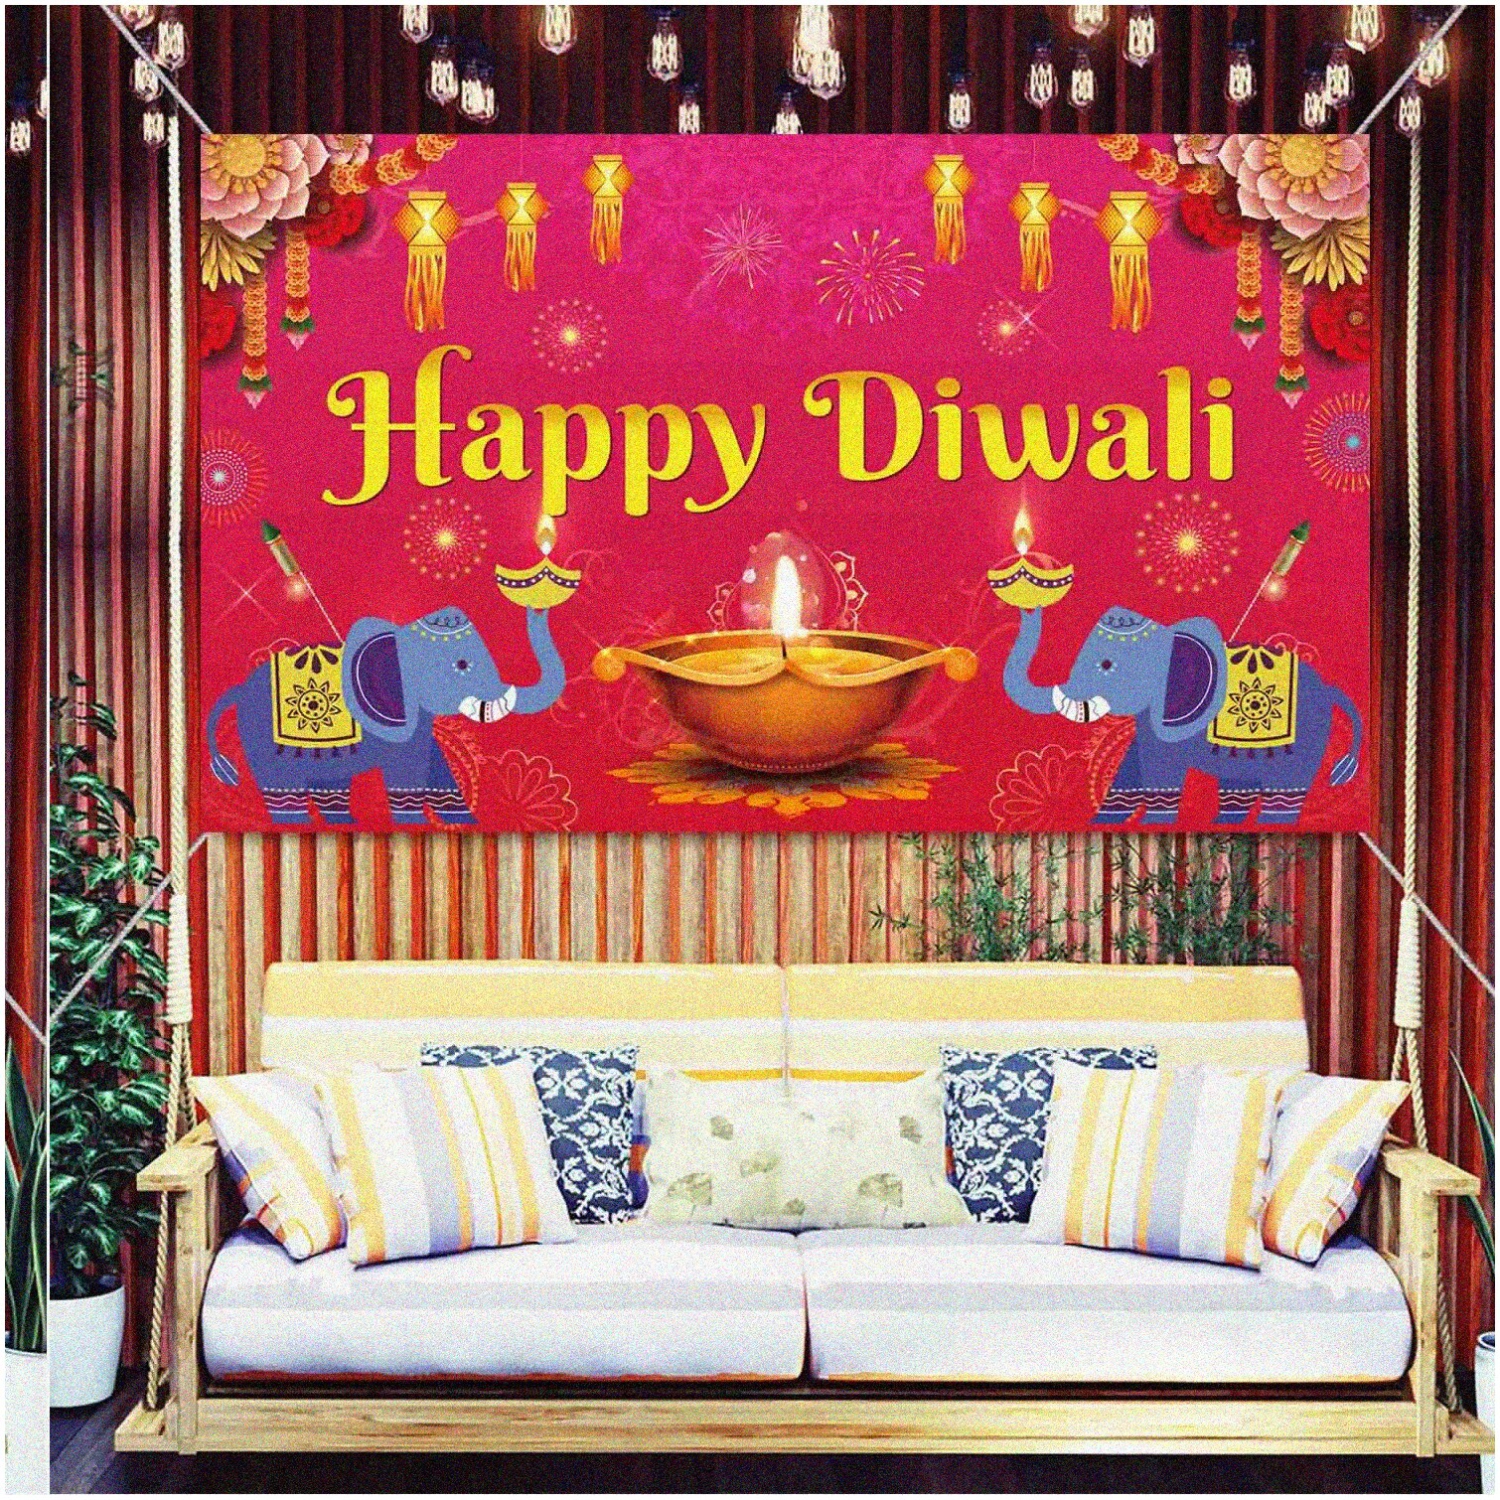 Sparkling Diwali Celebration Backdrop - Vibrant 70.8X43.3inch Banner for India's Festival of Lights. Perfect Diwali Party Supplier - Captivating Photography Background & Party Deco